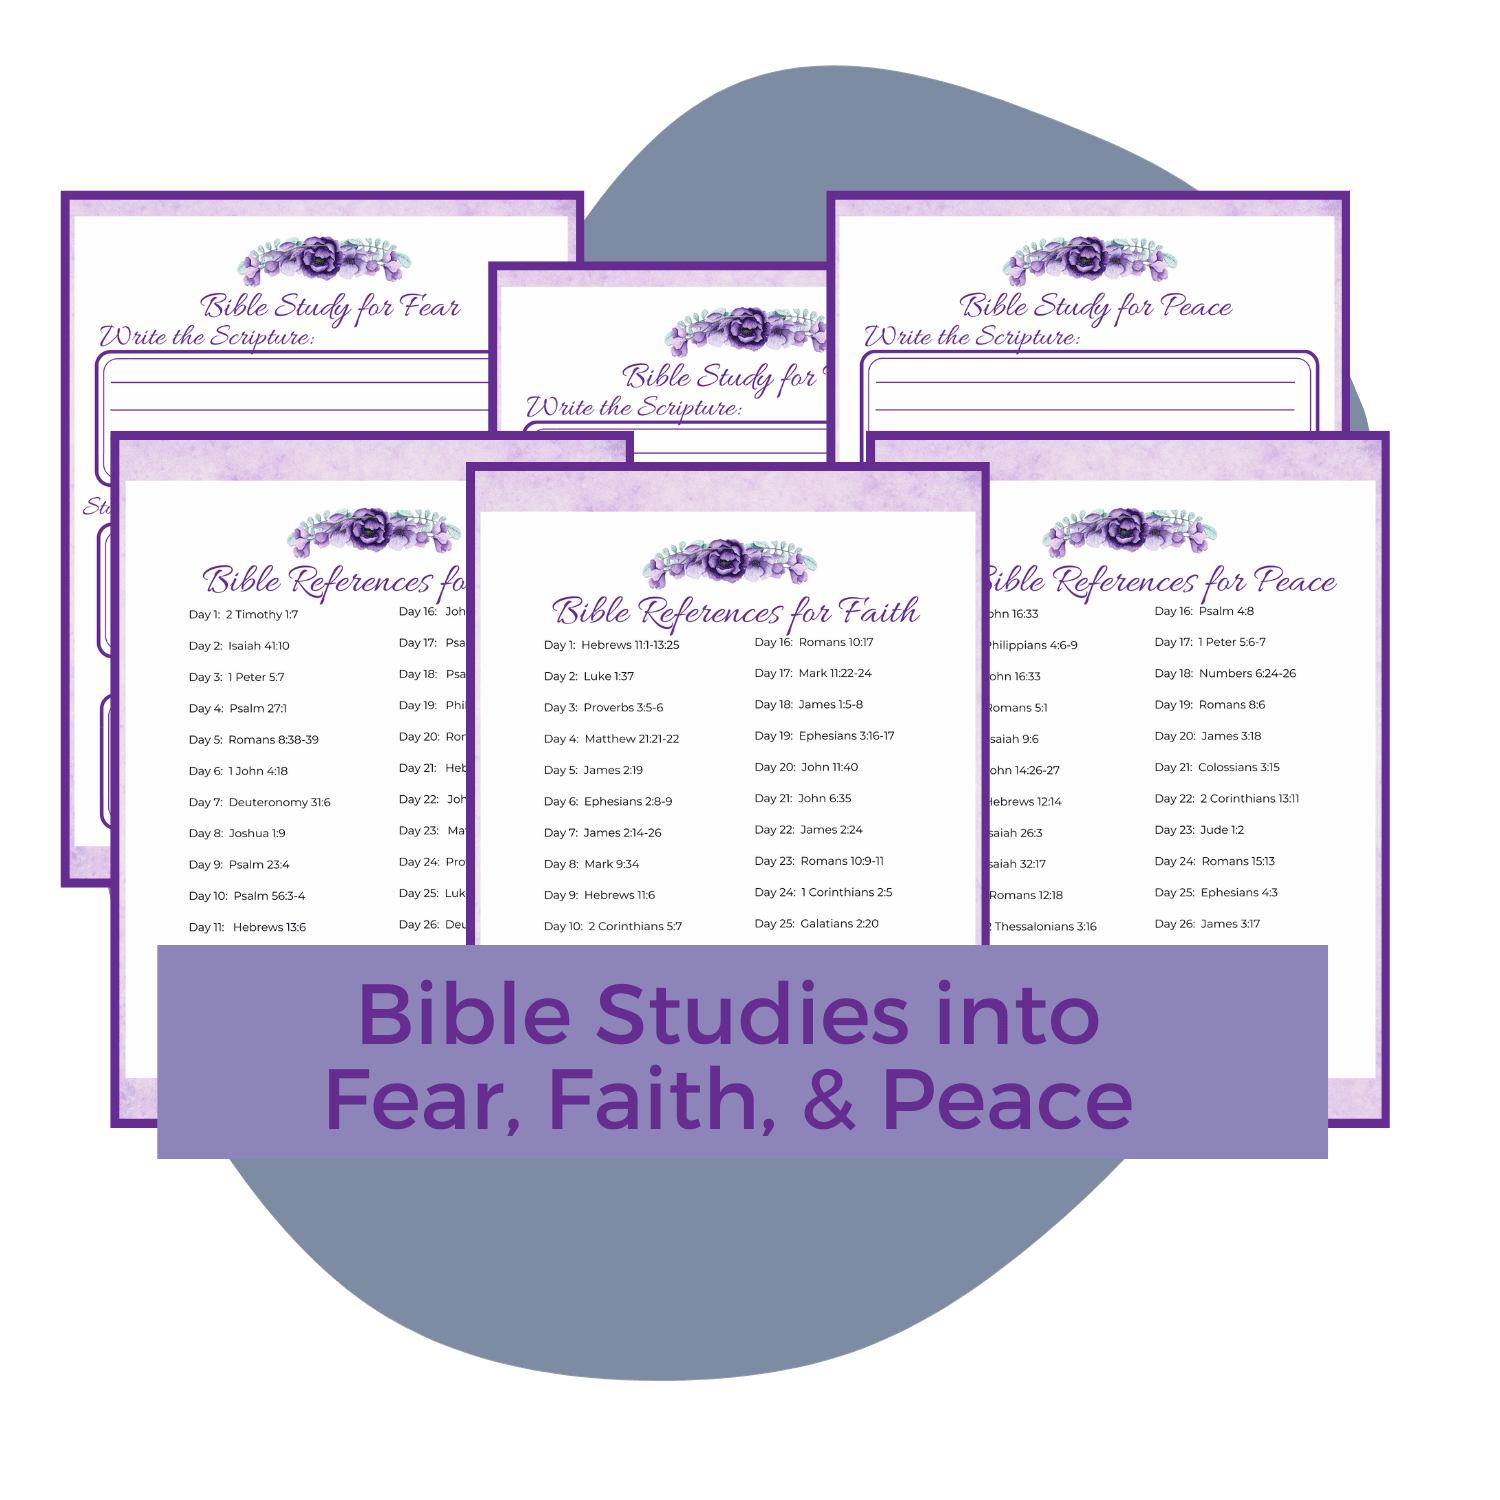 faith over fear toolbox mockup with bible studies